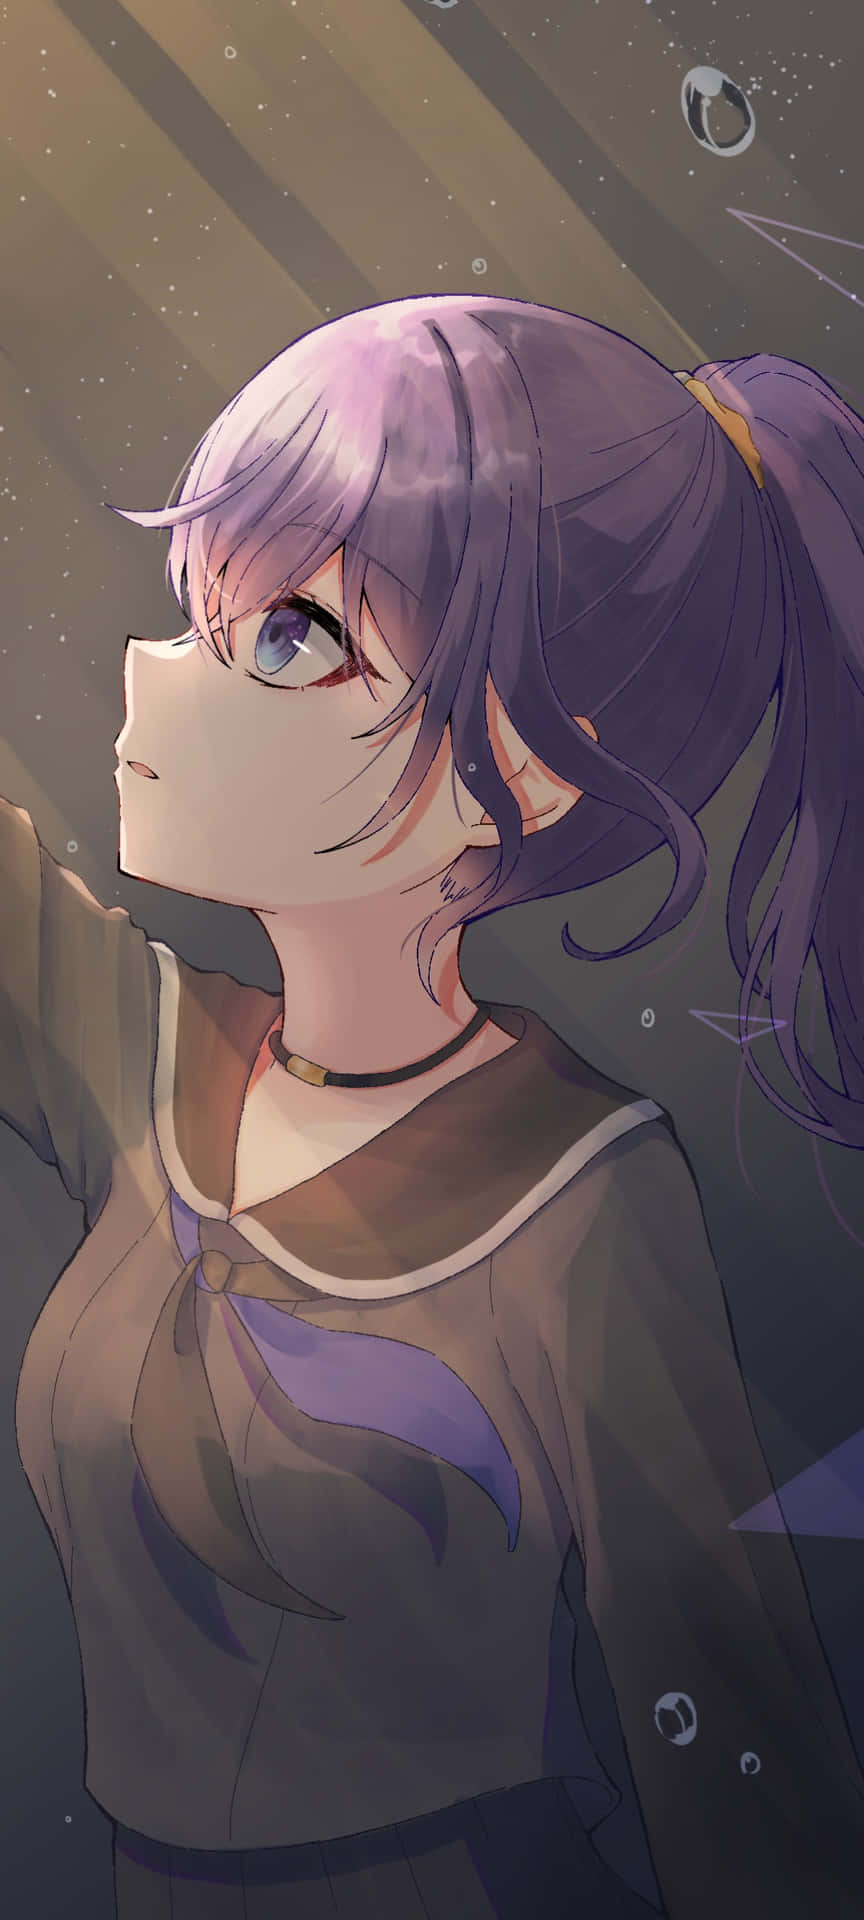 Contemplative Purple Haired Anime Girl Wallpaper